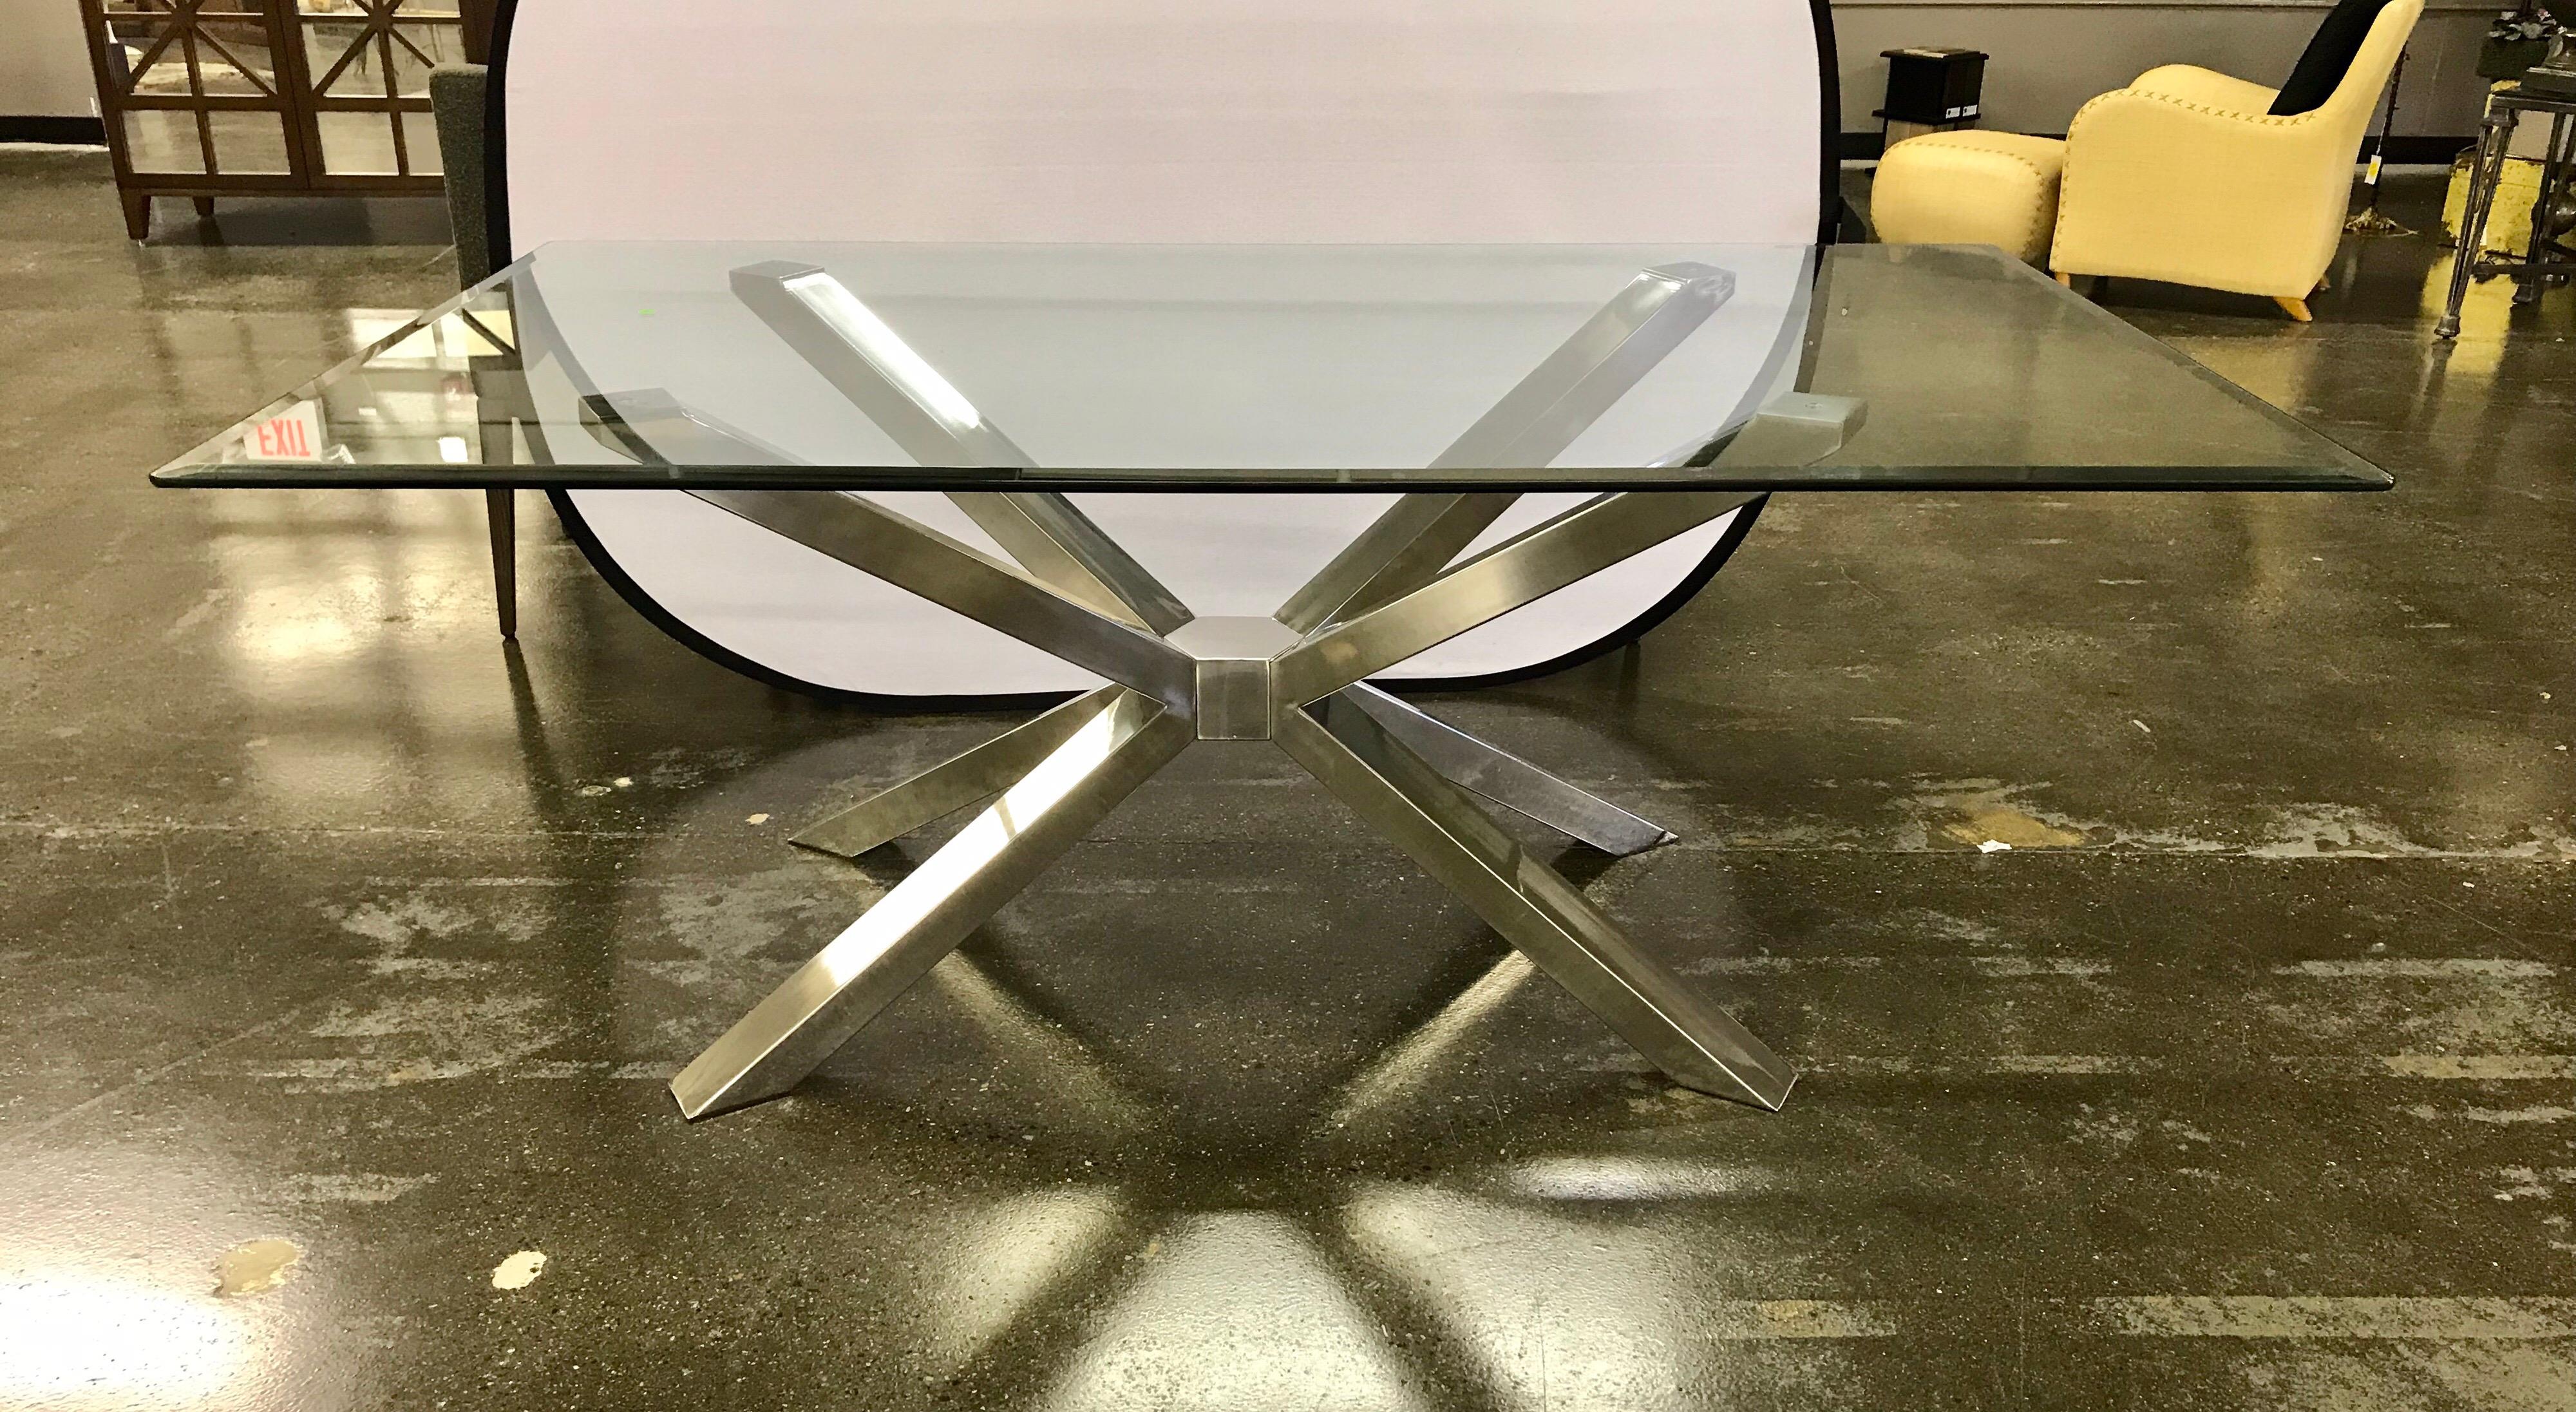 Exceptional mid century modern style  glass dining table with a sculptural chrome base and four Calligaris matching chairs in dark olive upholstery. The table dimensions are below and the chair dimensions are 19 x 21 x 34 tall with a seat height of